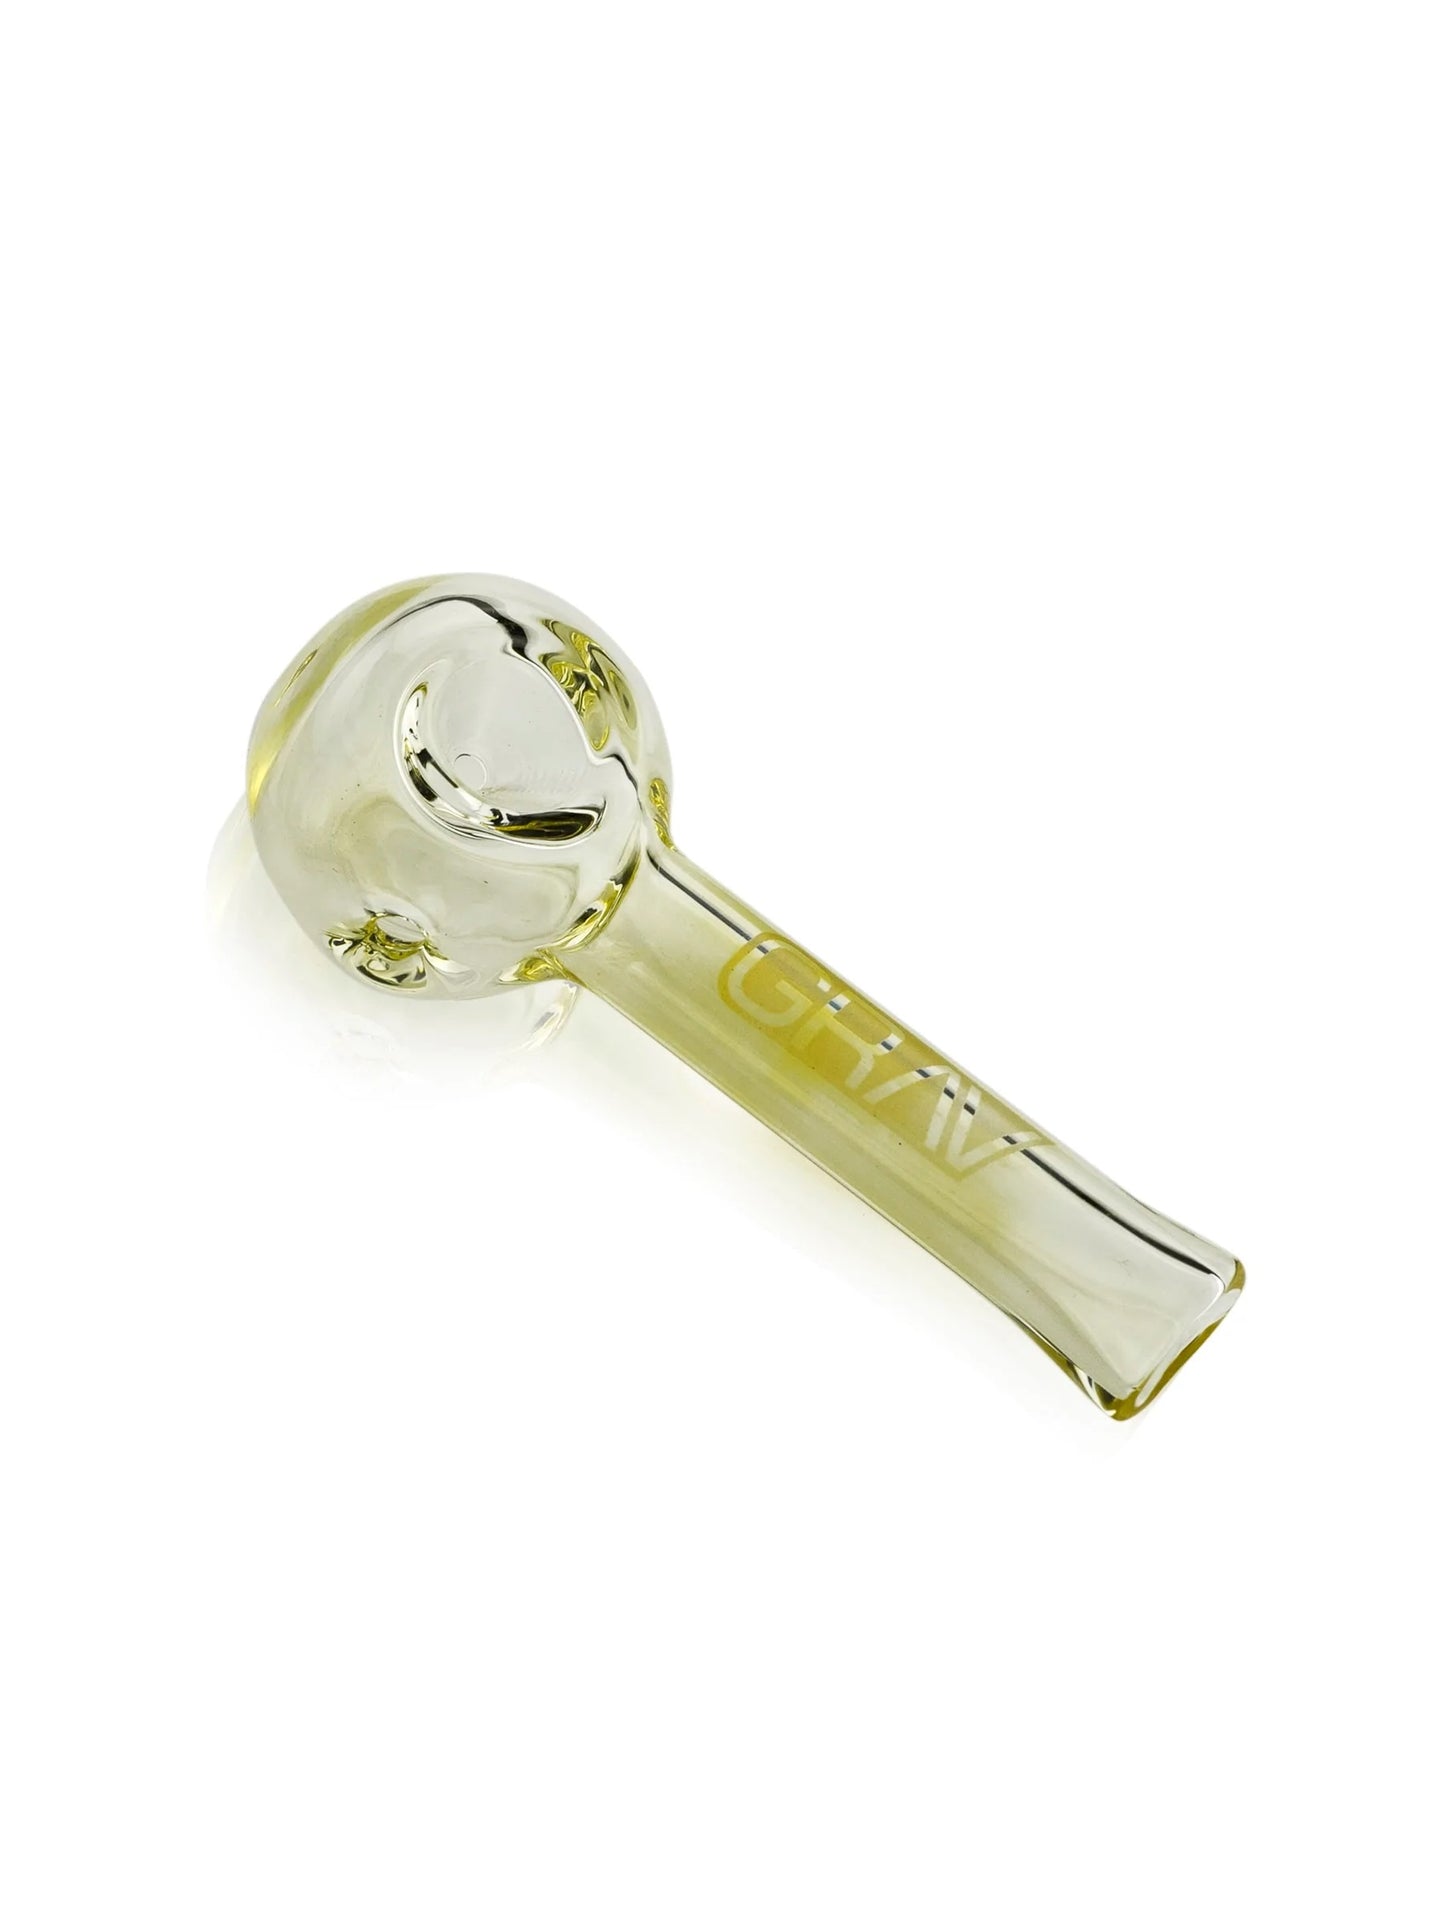 GRAV 3.25" PINCH SPOON SMOKING PIPE GLASS ALL COLORS